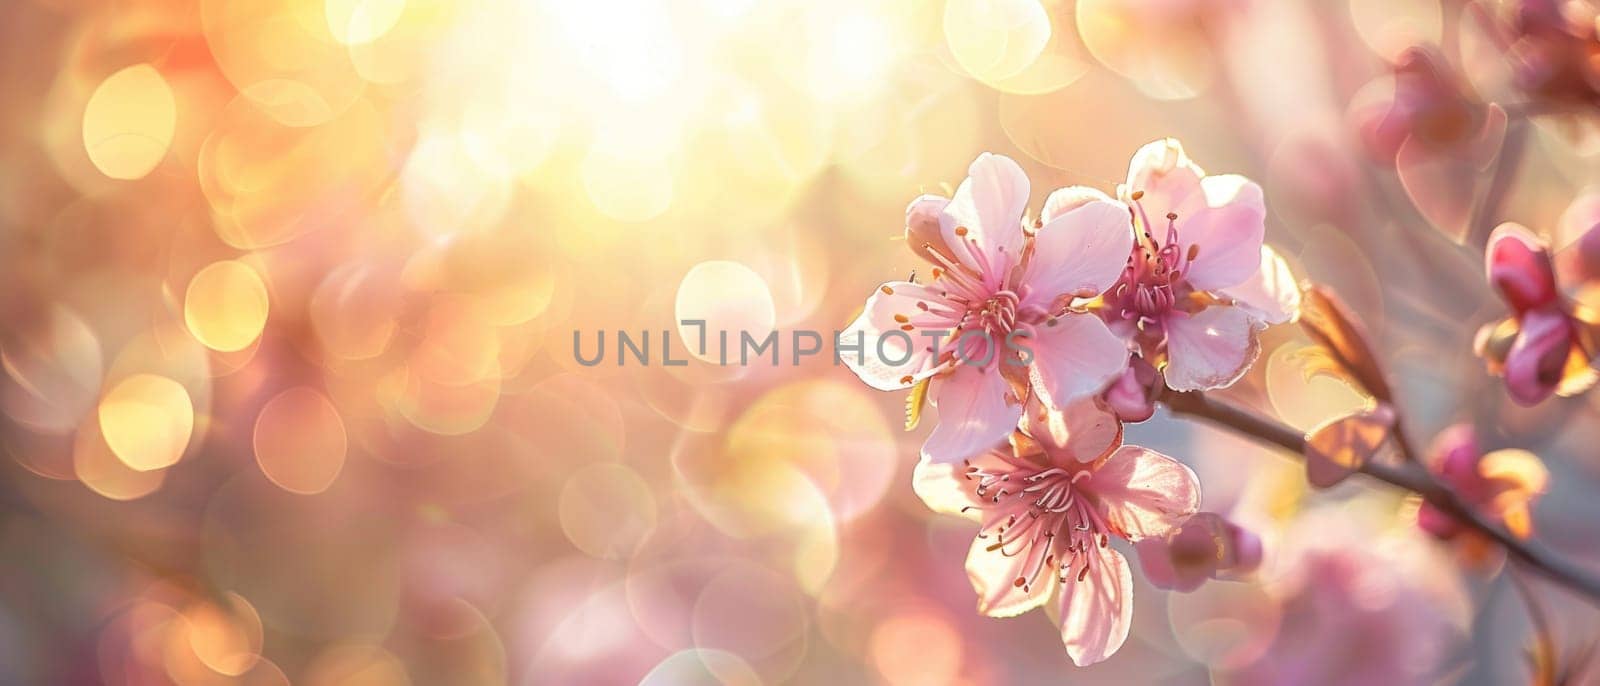 A close up of a pink flower with a blurry background by AI generated image.